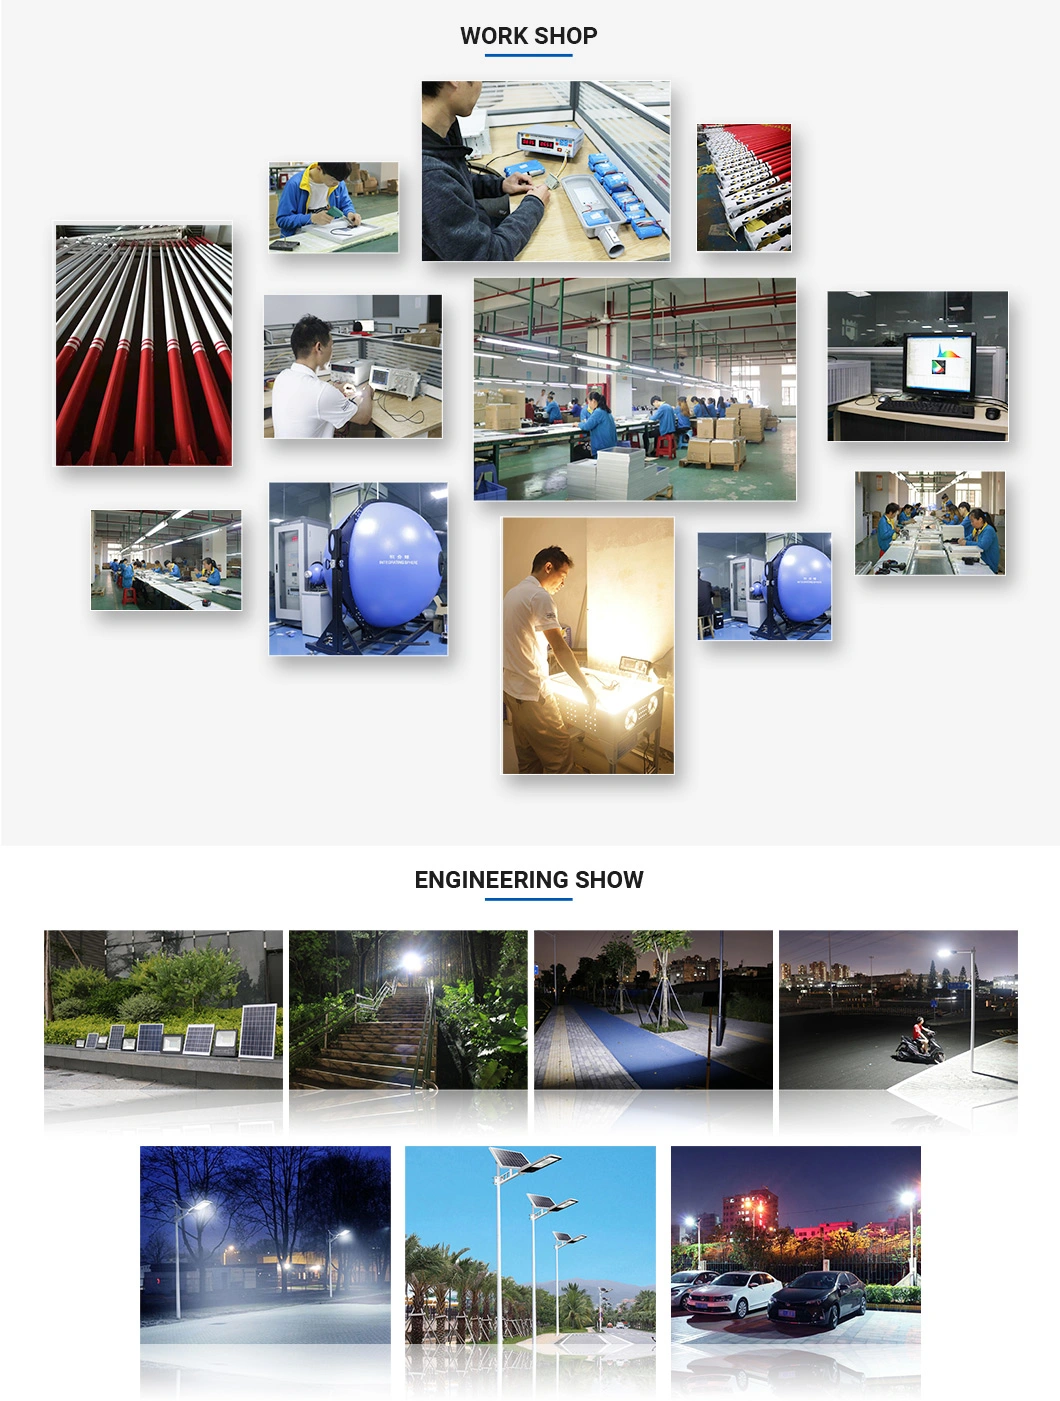 Remote Monitoring Street Light and Control System of Solar Street Lamps